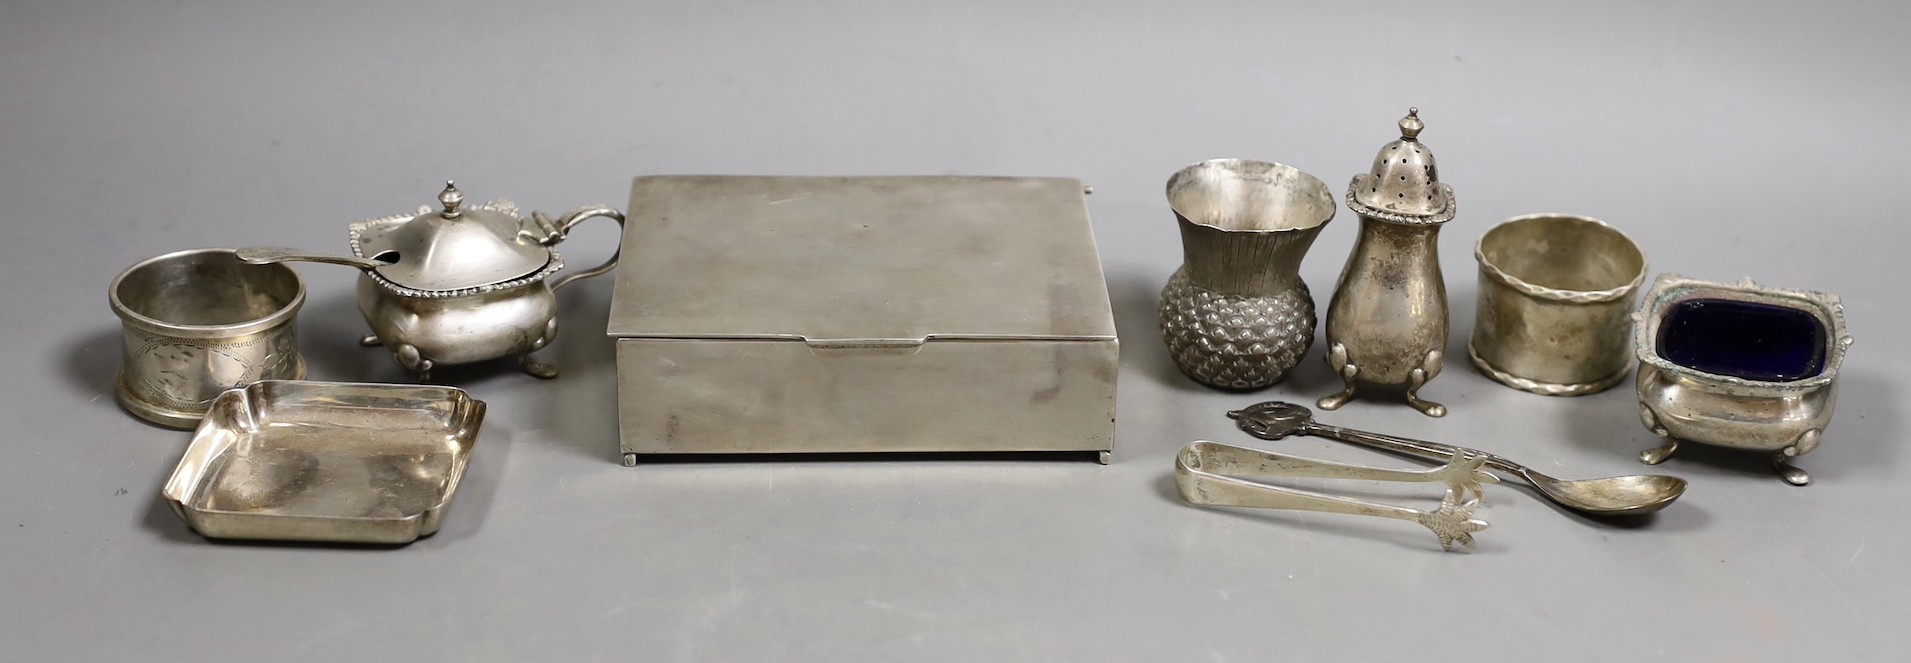 A George V silver mounted cigarette box, 11.5cm and other small sundry silver and plated items including napkin rings, condiments and small dish.                                                                           